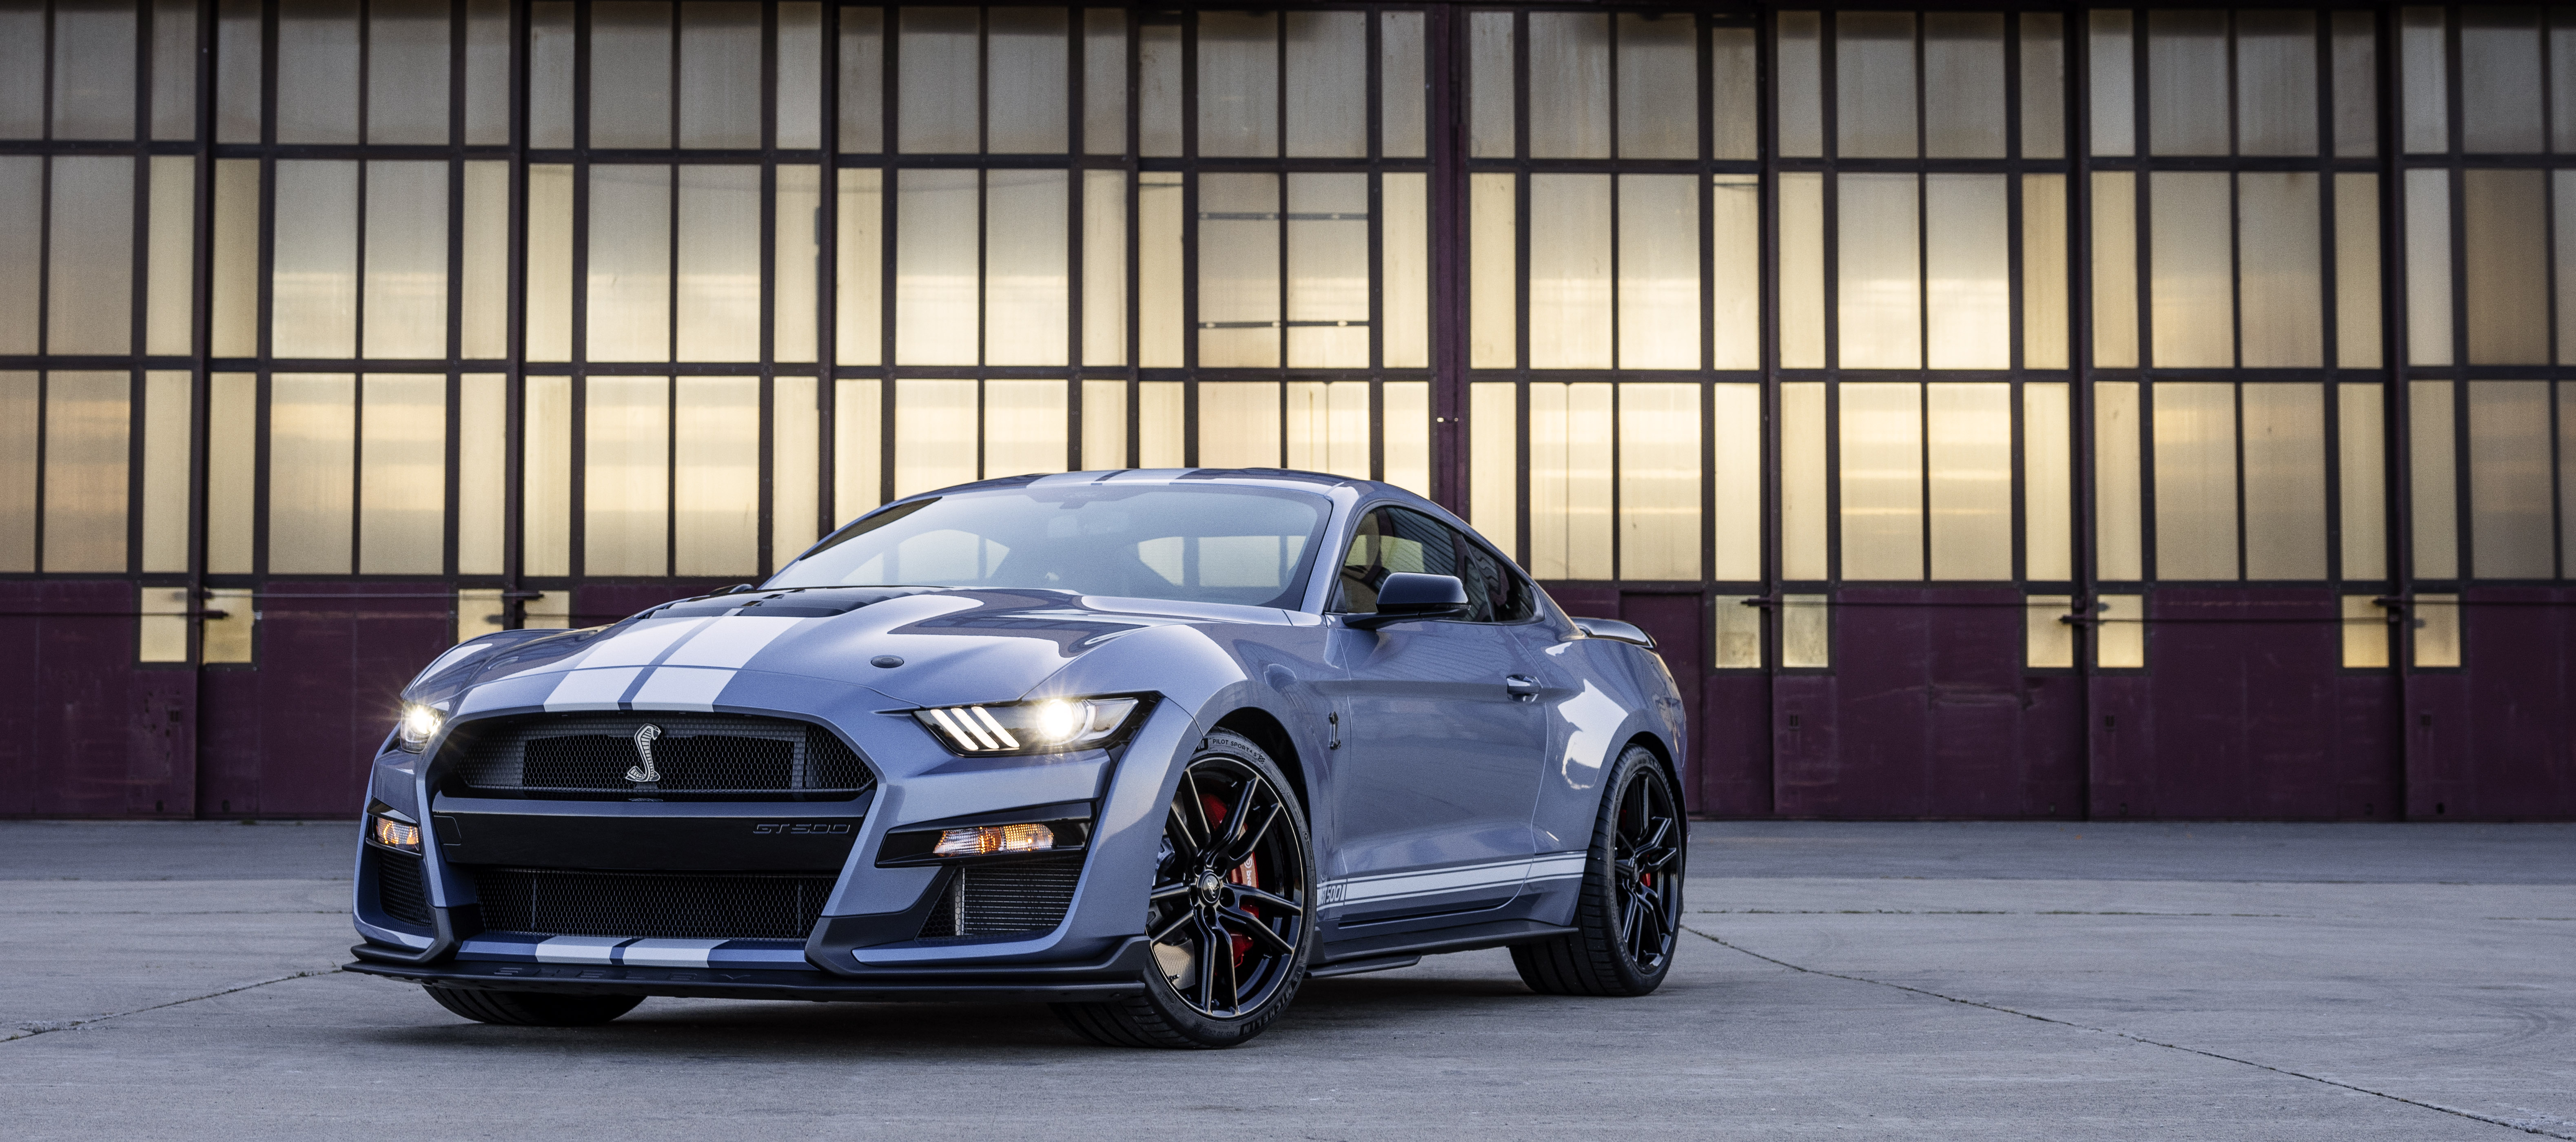 Ford Mustang Coastal Limited Edition and GT500 Heritage Edition Unveiled